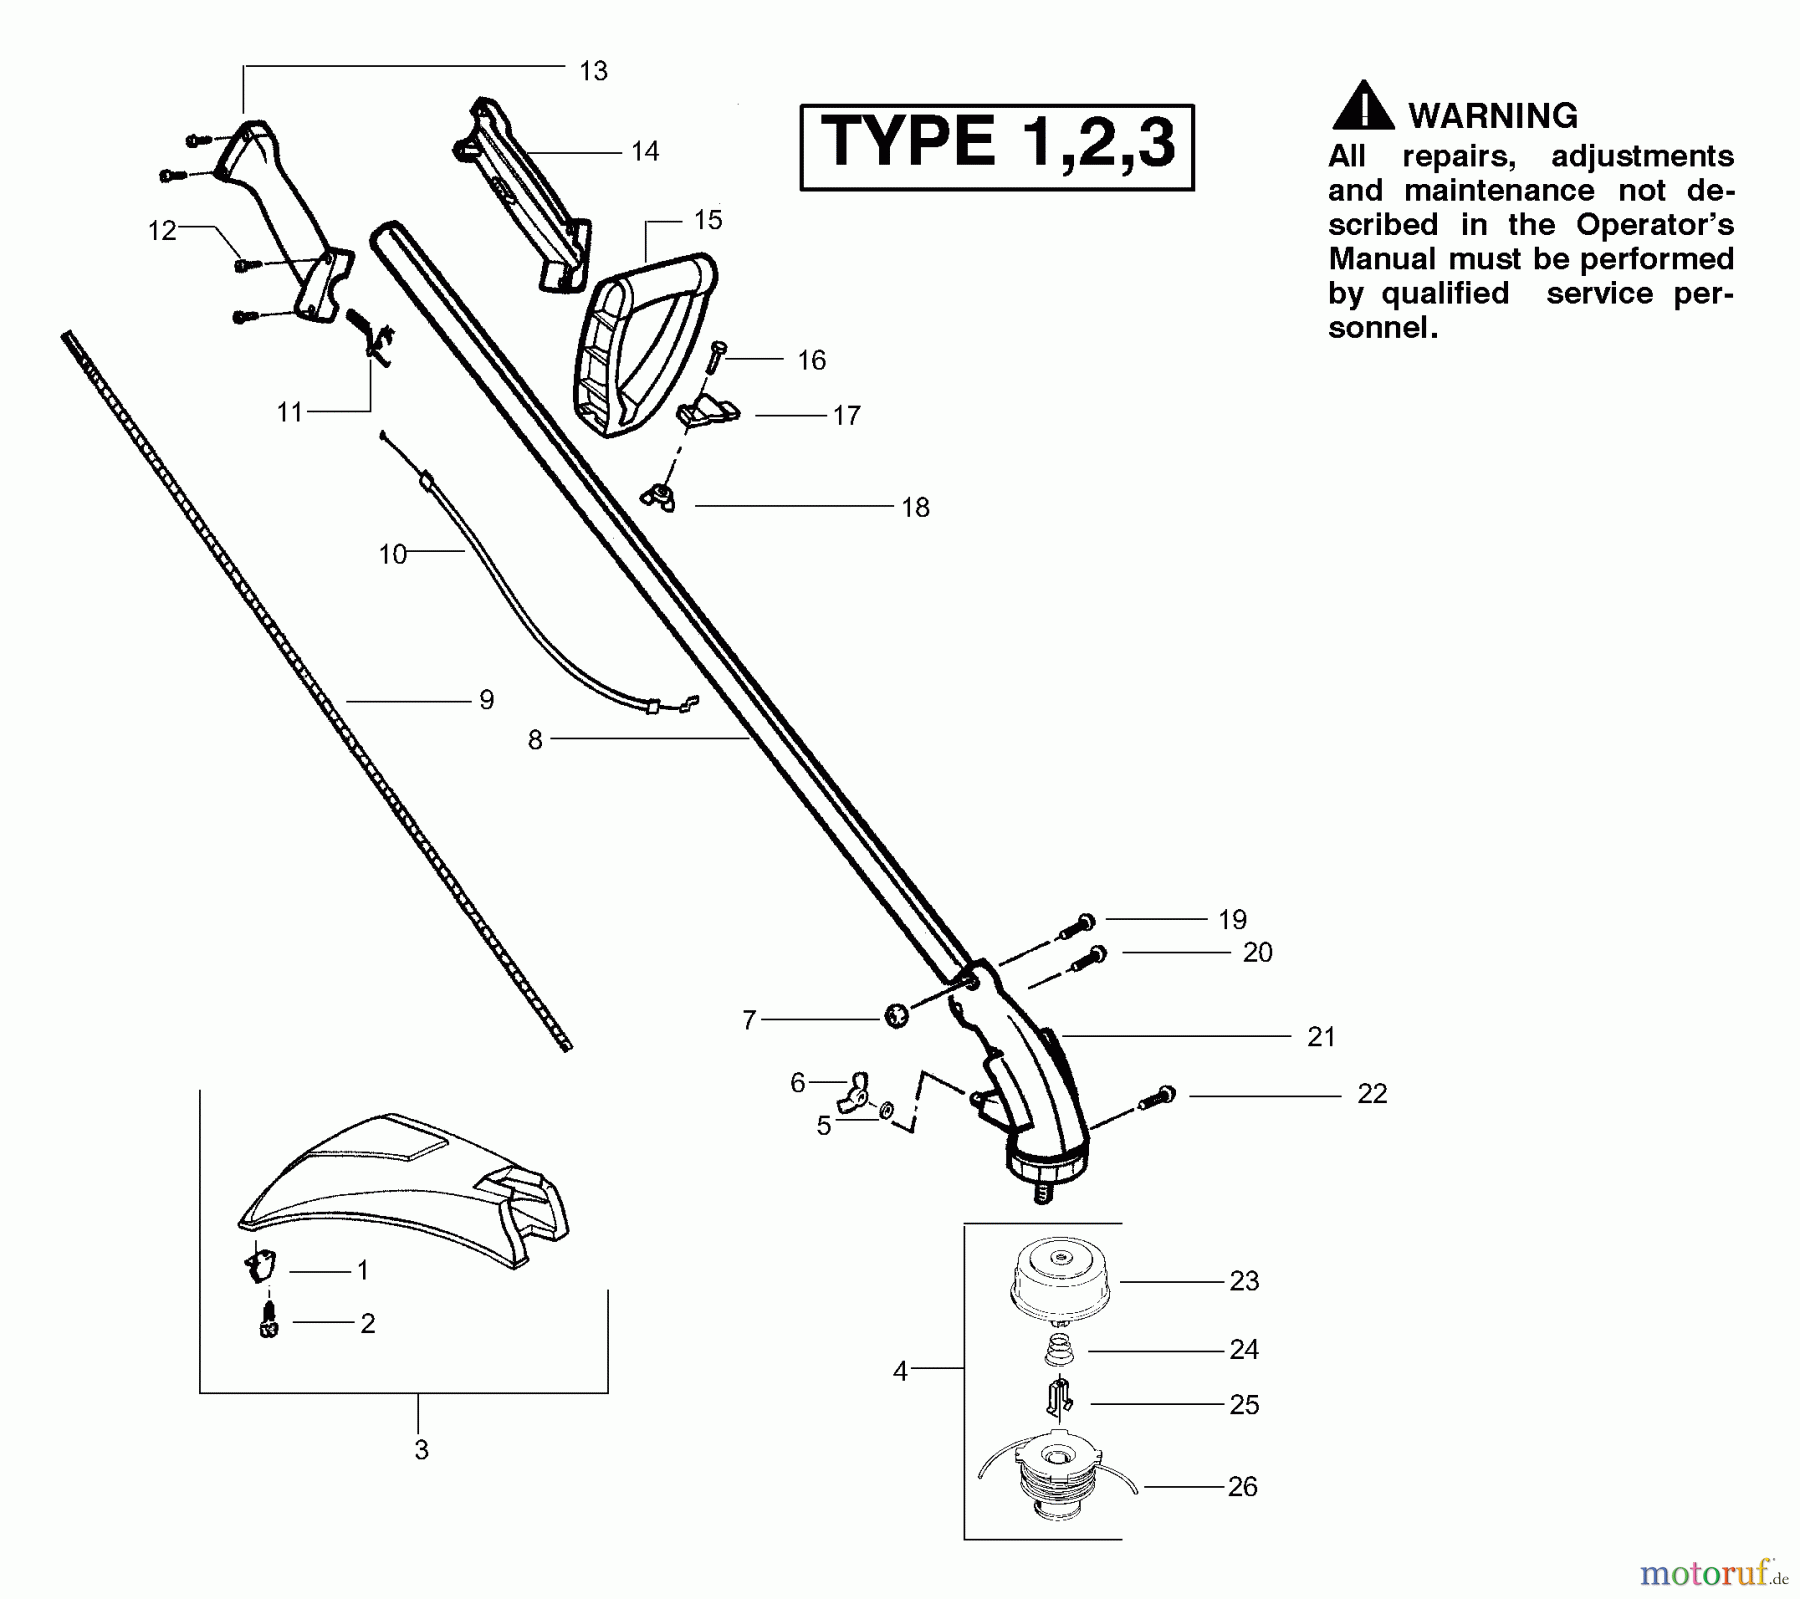  Poulan / Weed Eater Motorsensen, Trimmer SST (Type 2) - Weed Eater Featherlite LE String Trimmer Drive Shaft & Cutting Head